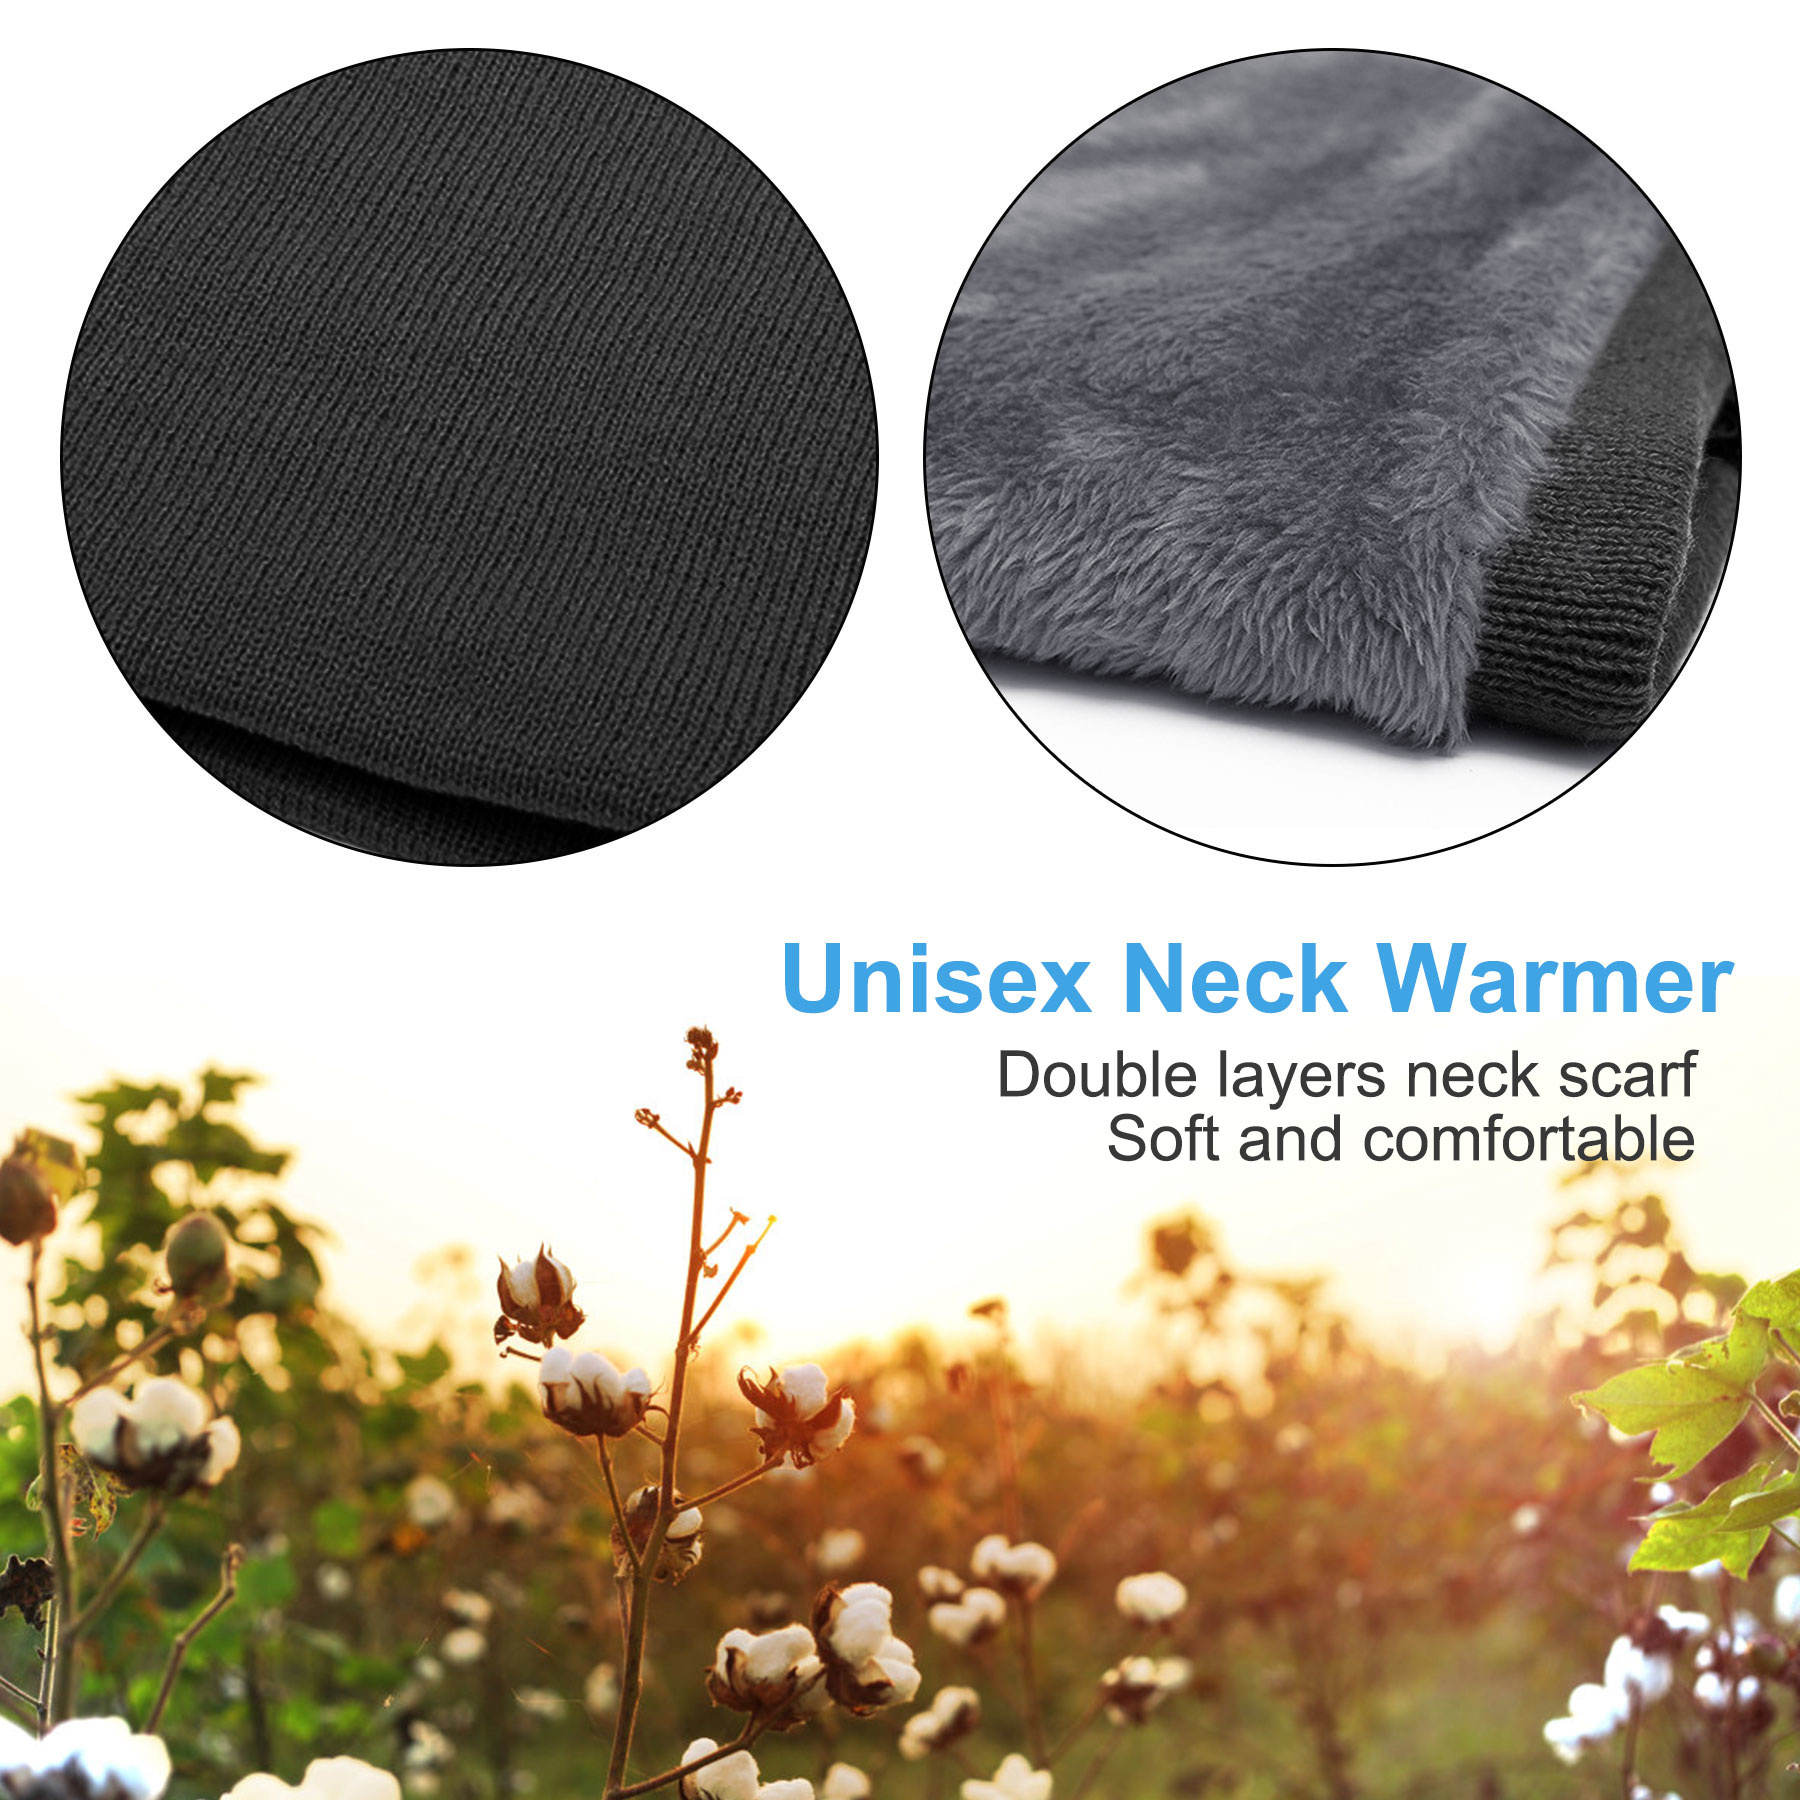 Cold Weather Neck Warmer for Men and Women, Sports Neck Gaiter, Skiing Neck Warmer, Tube Scarf – Soft Stretchy and Winter-proof - Brown-3